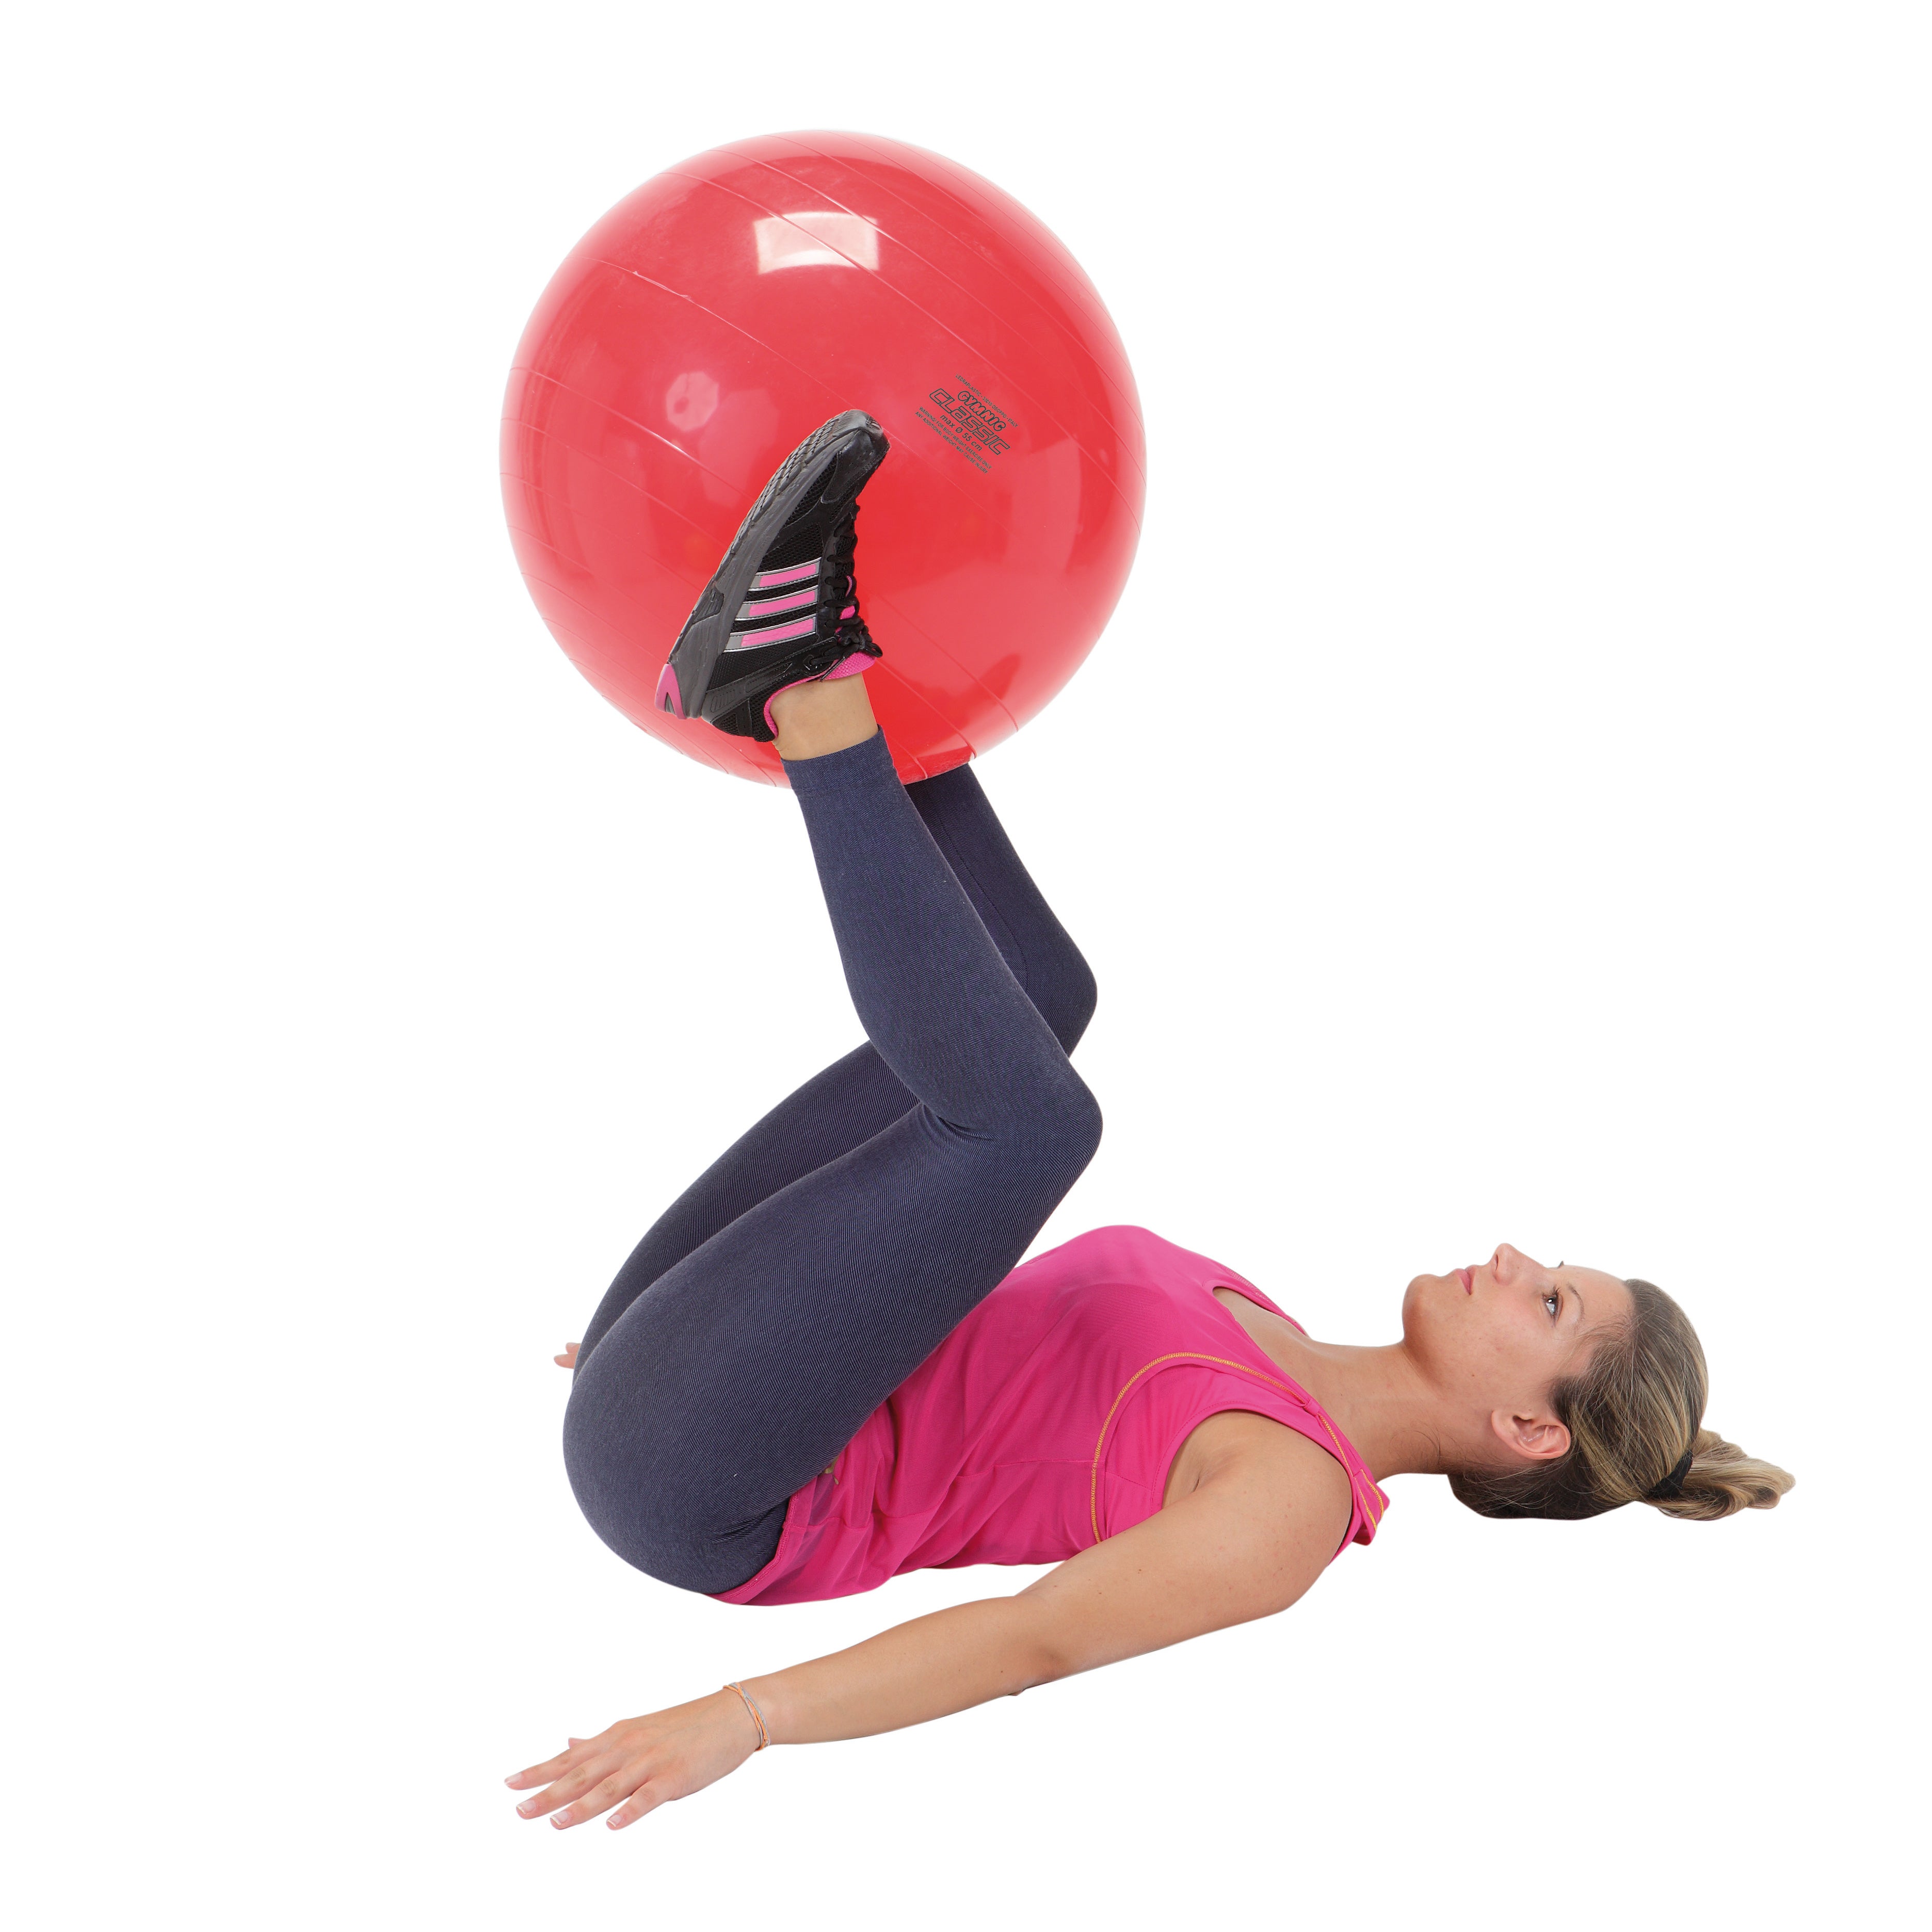 Gymnic Classic Physiotherapy Ball (55cm)